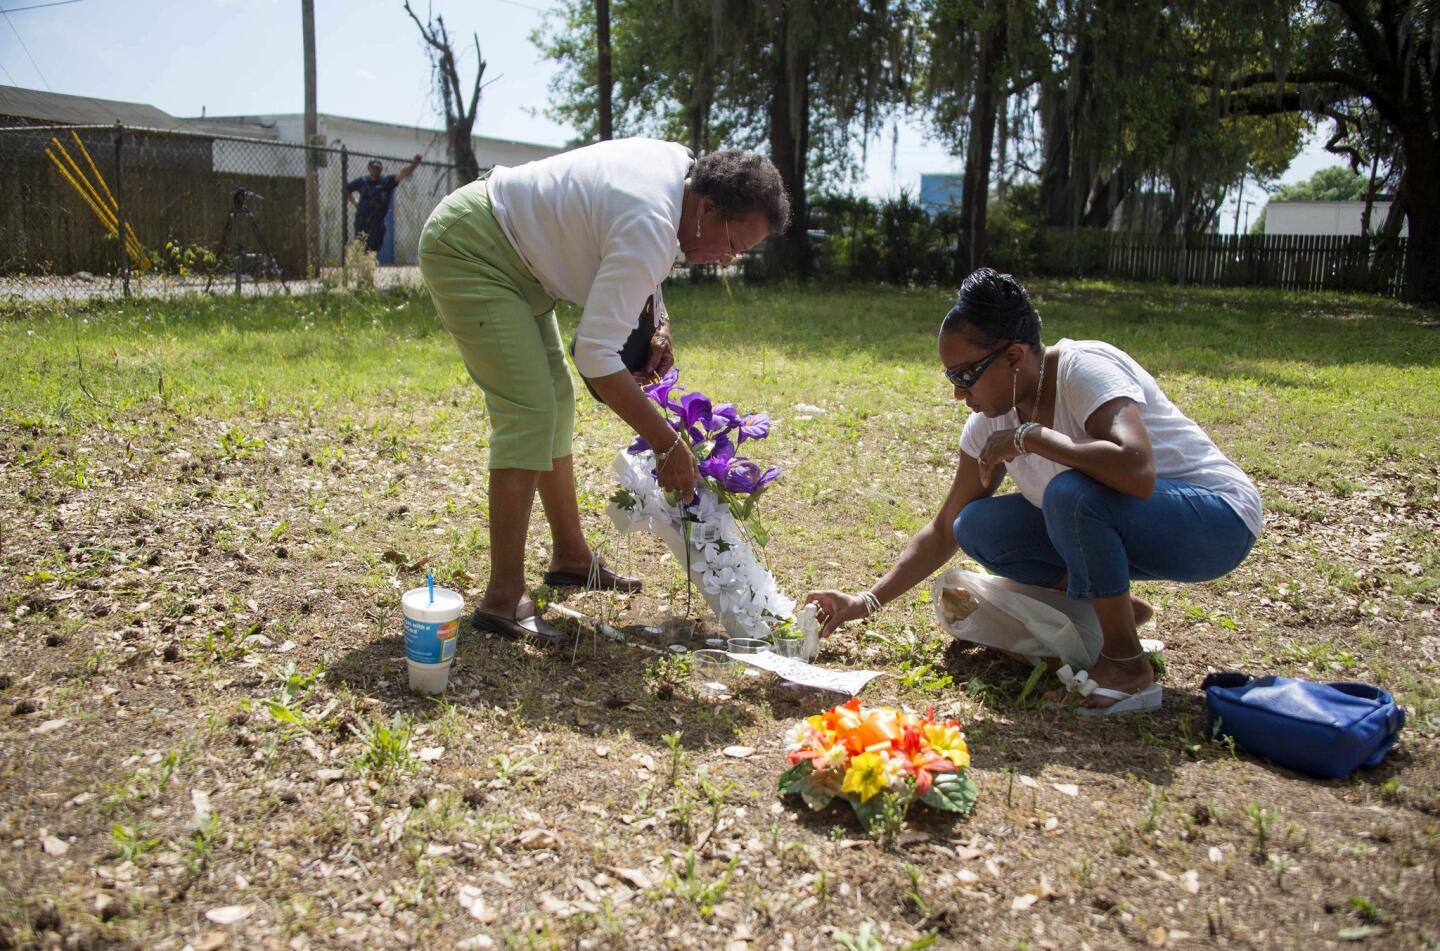 Walter Scott's cousin Barbara Scott, right, leaves flowers at the lot where Scott was fatally shot in North Charleston, S.C. With her is her mother, Evaliana Smalls.